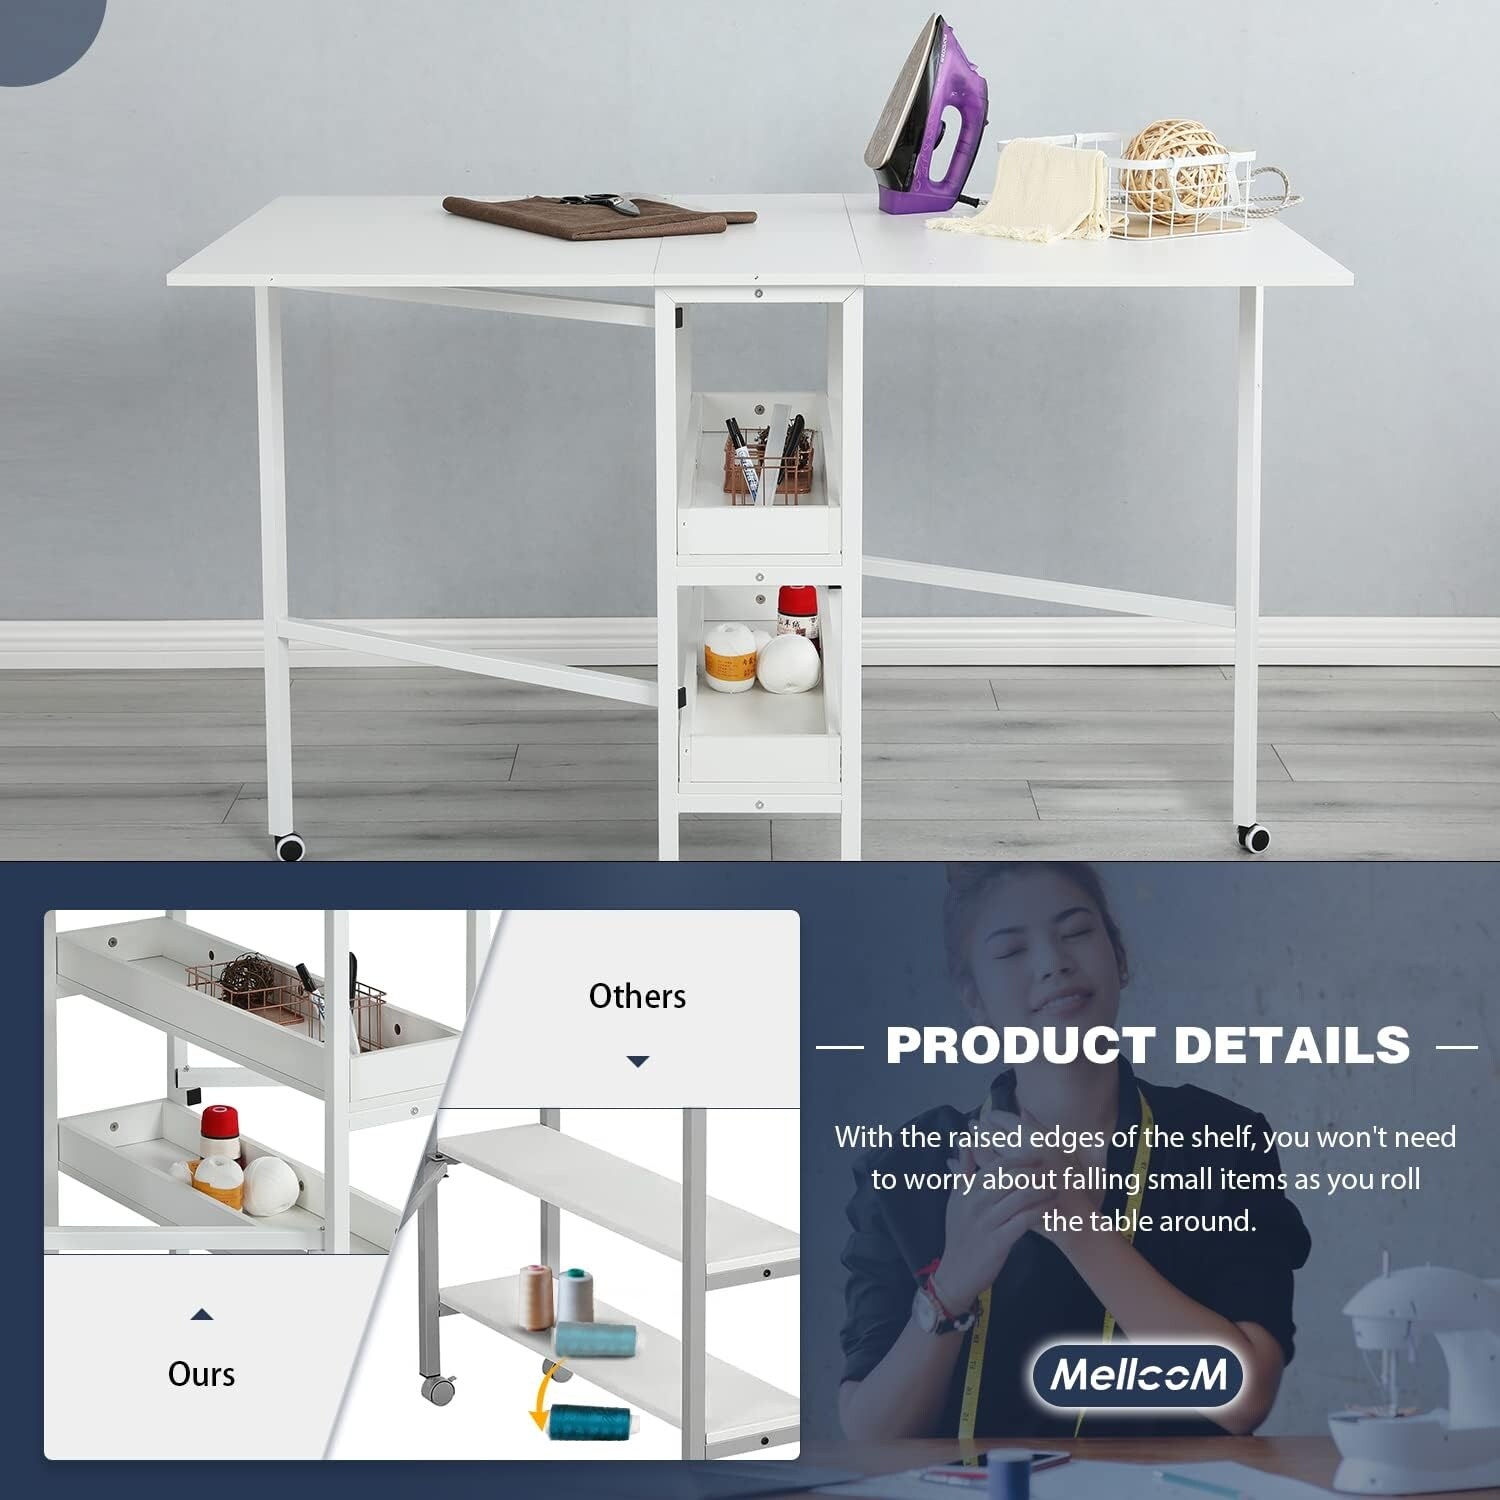 Sewing Craft Table, Art Desk with Storage Shelves and Lockable Casters,  White 